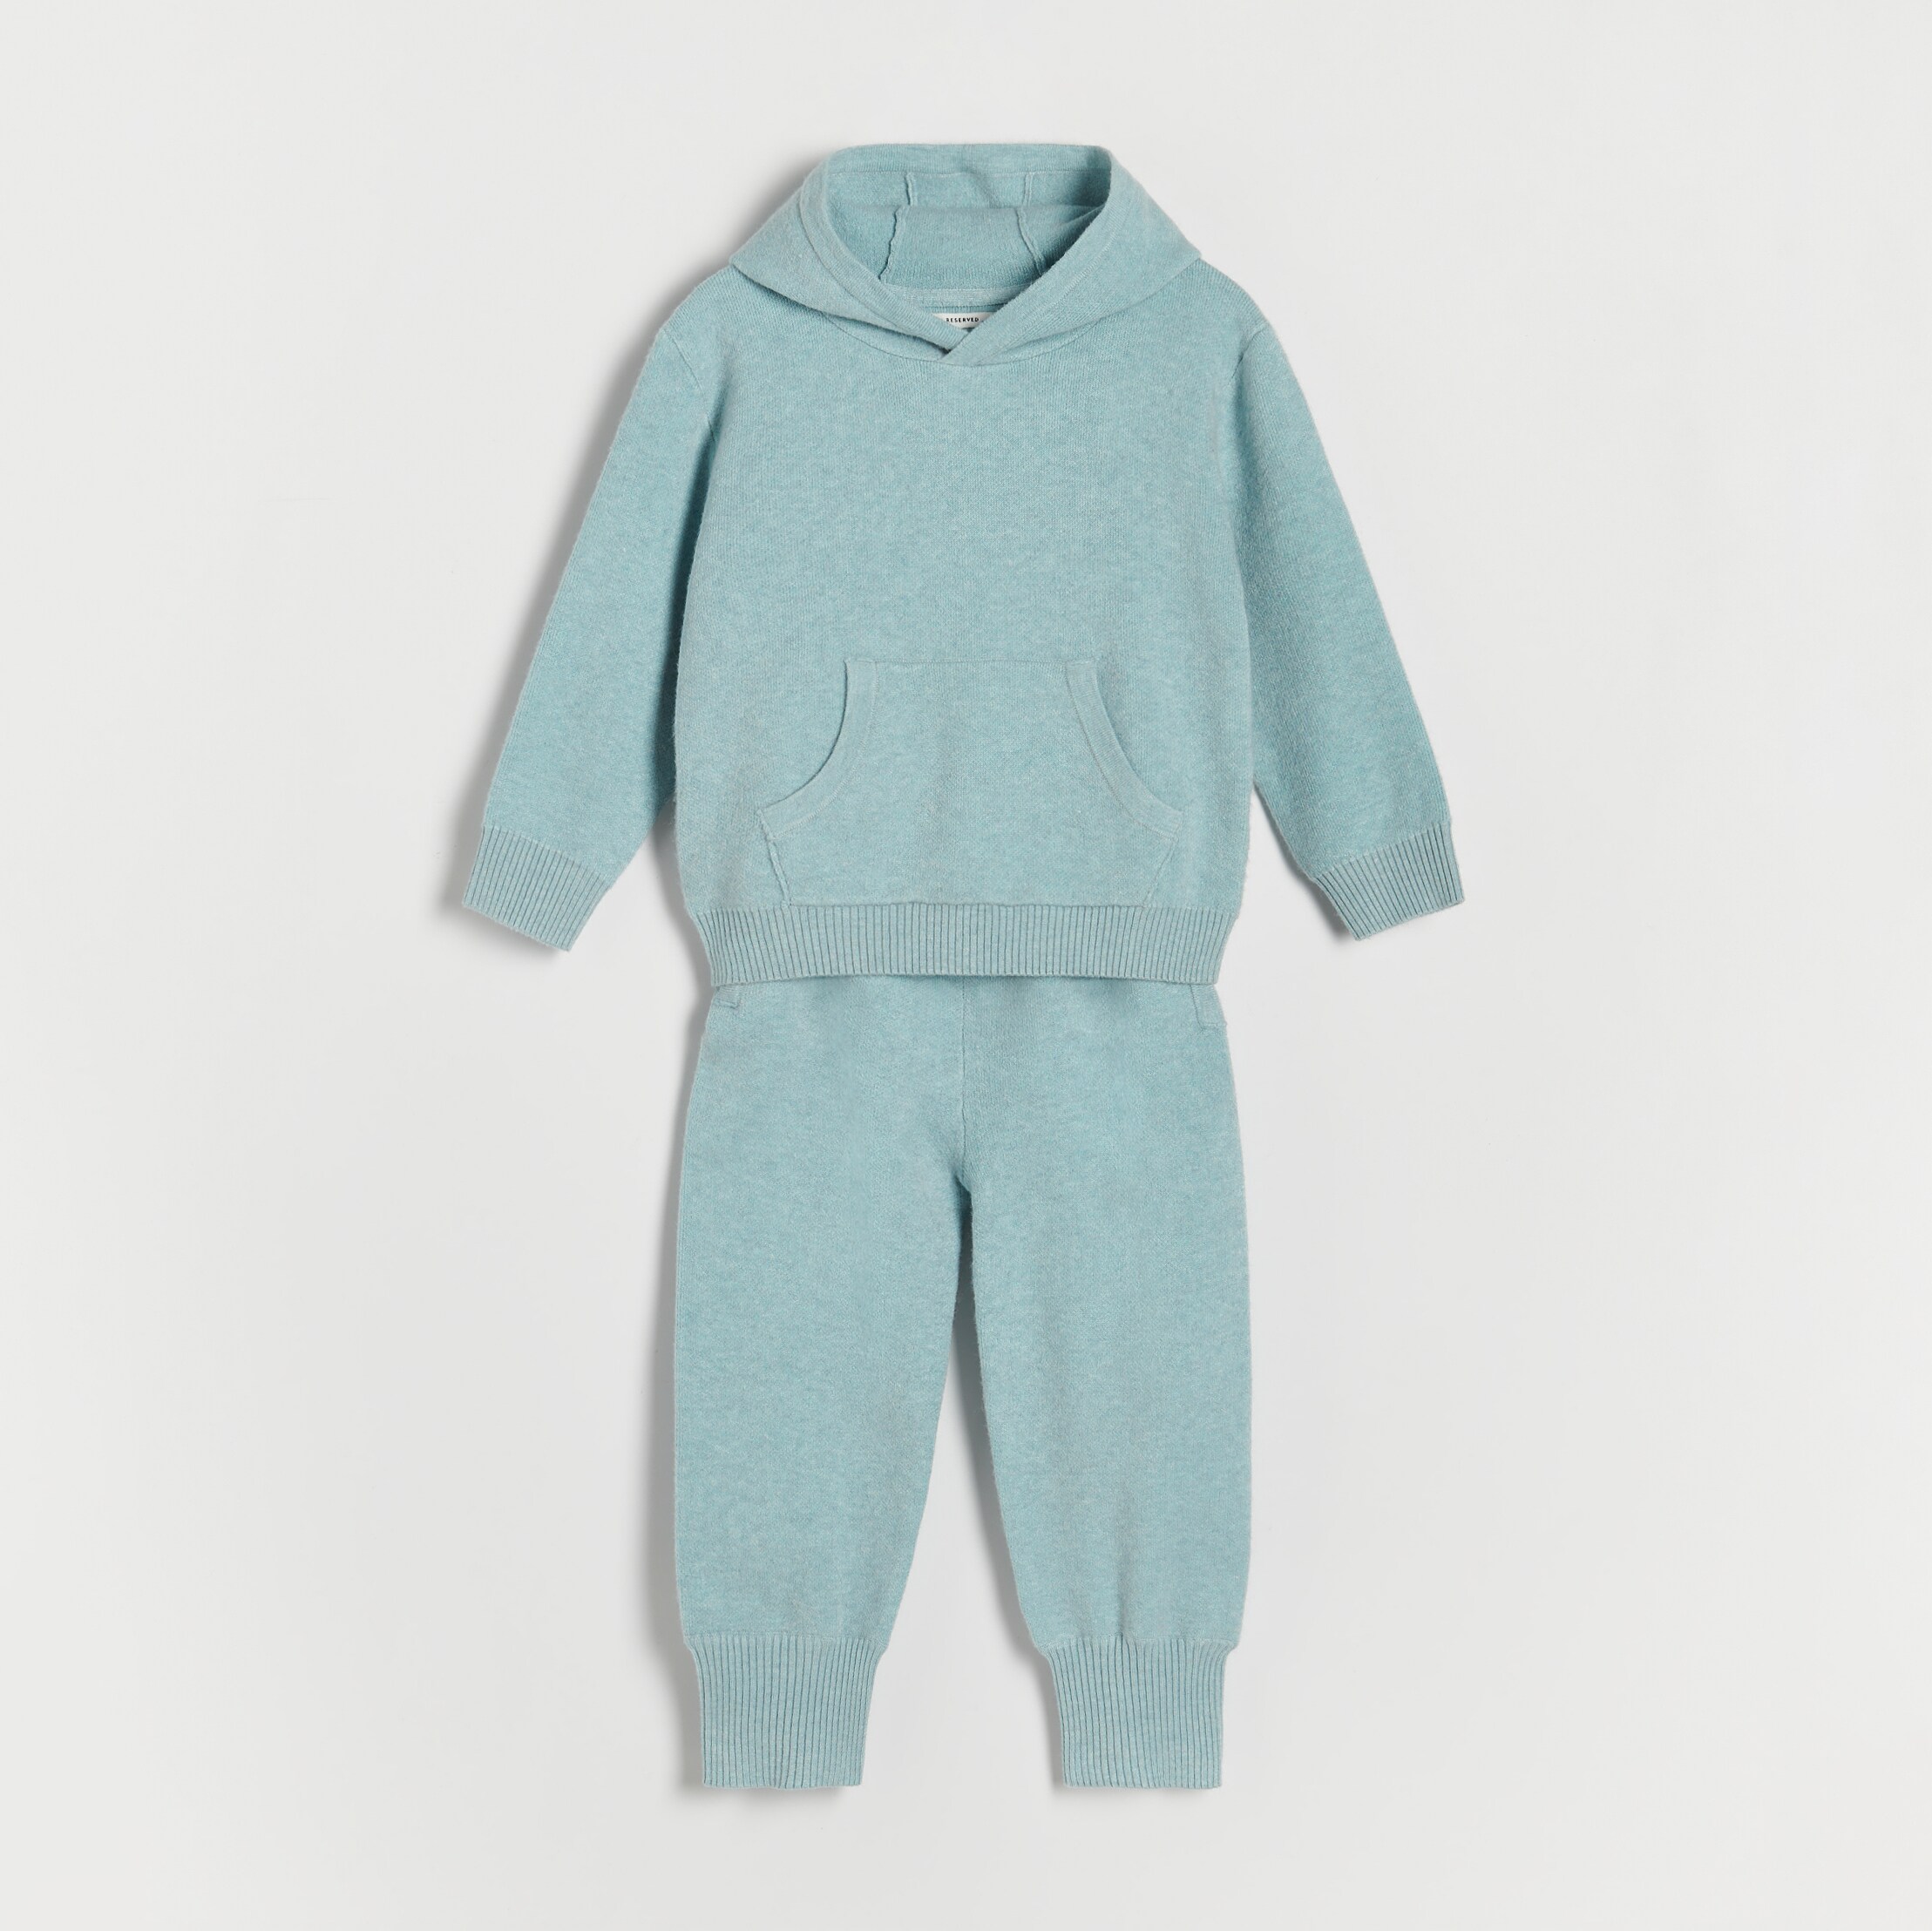 Reserved – Boys` sweater & trousers – Turcoaz baby imagine noua 2022